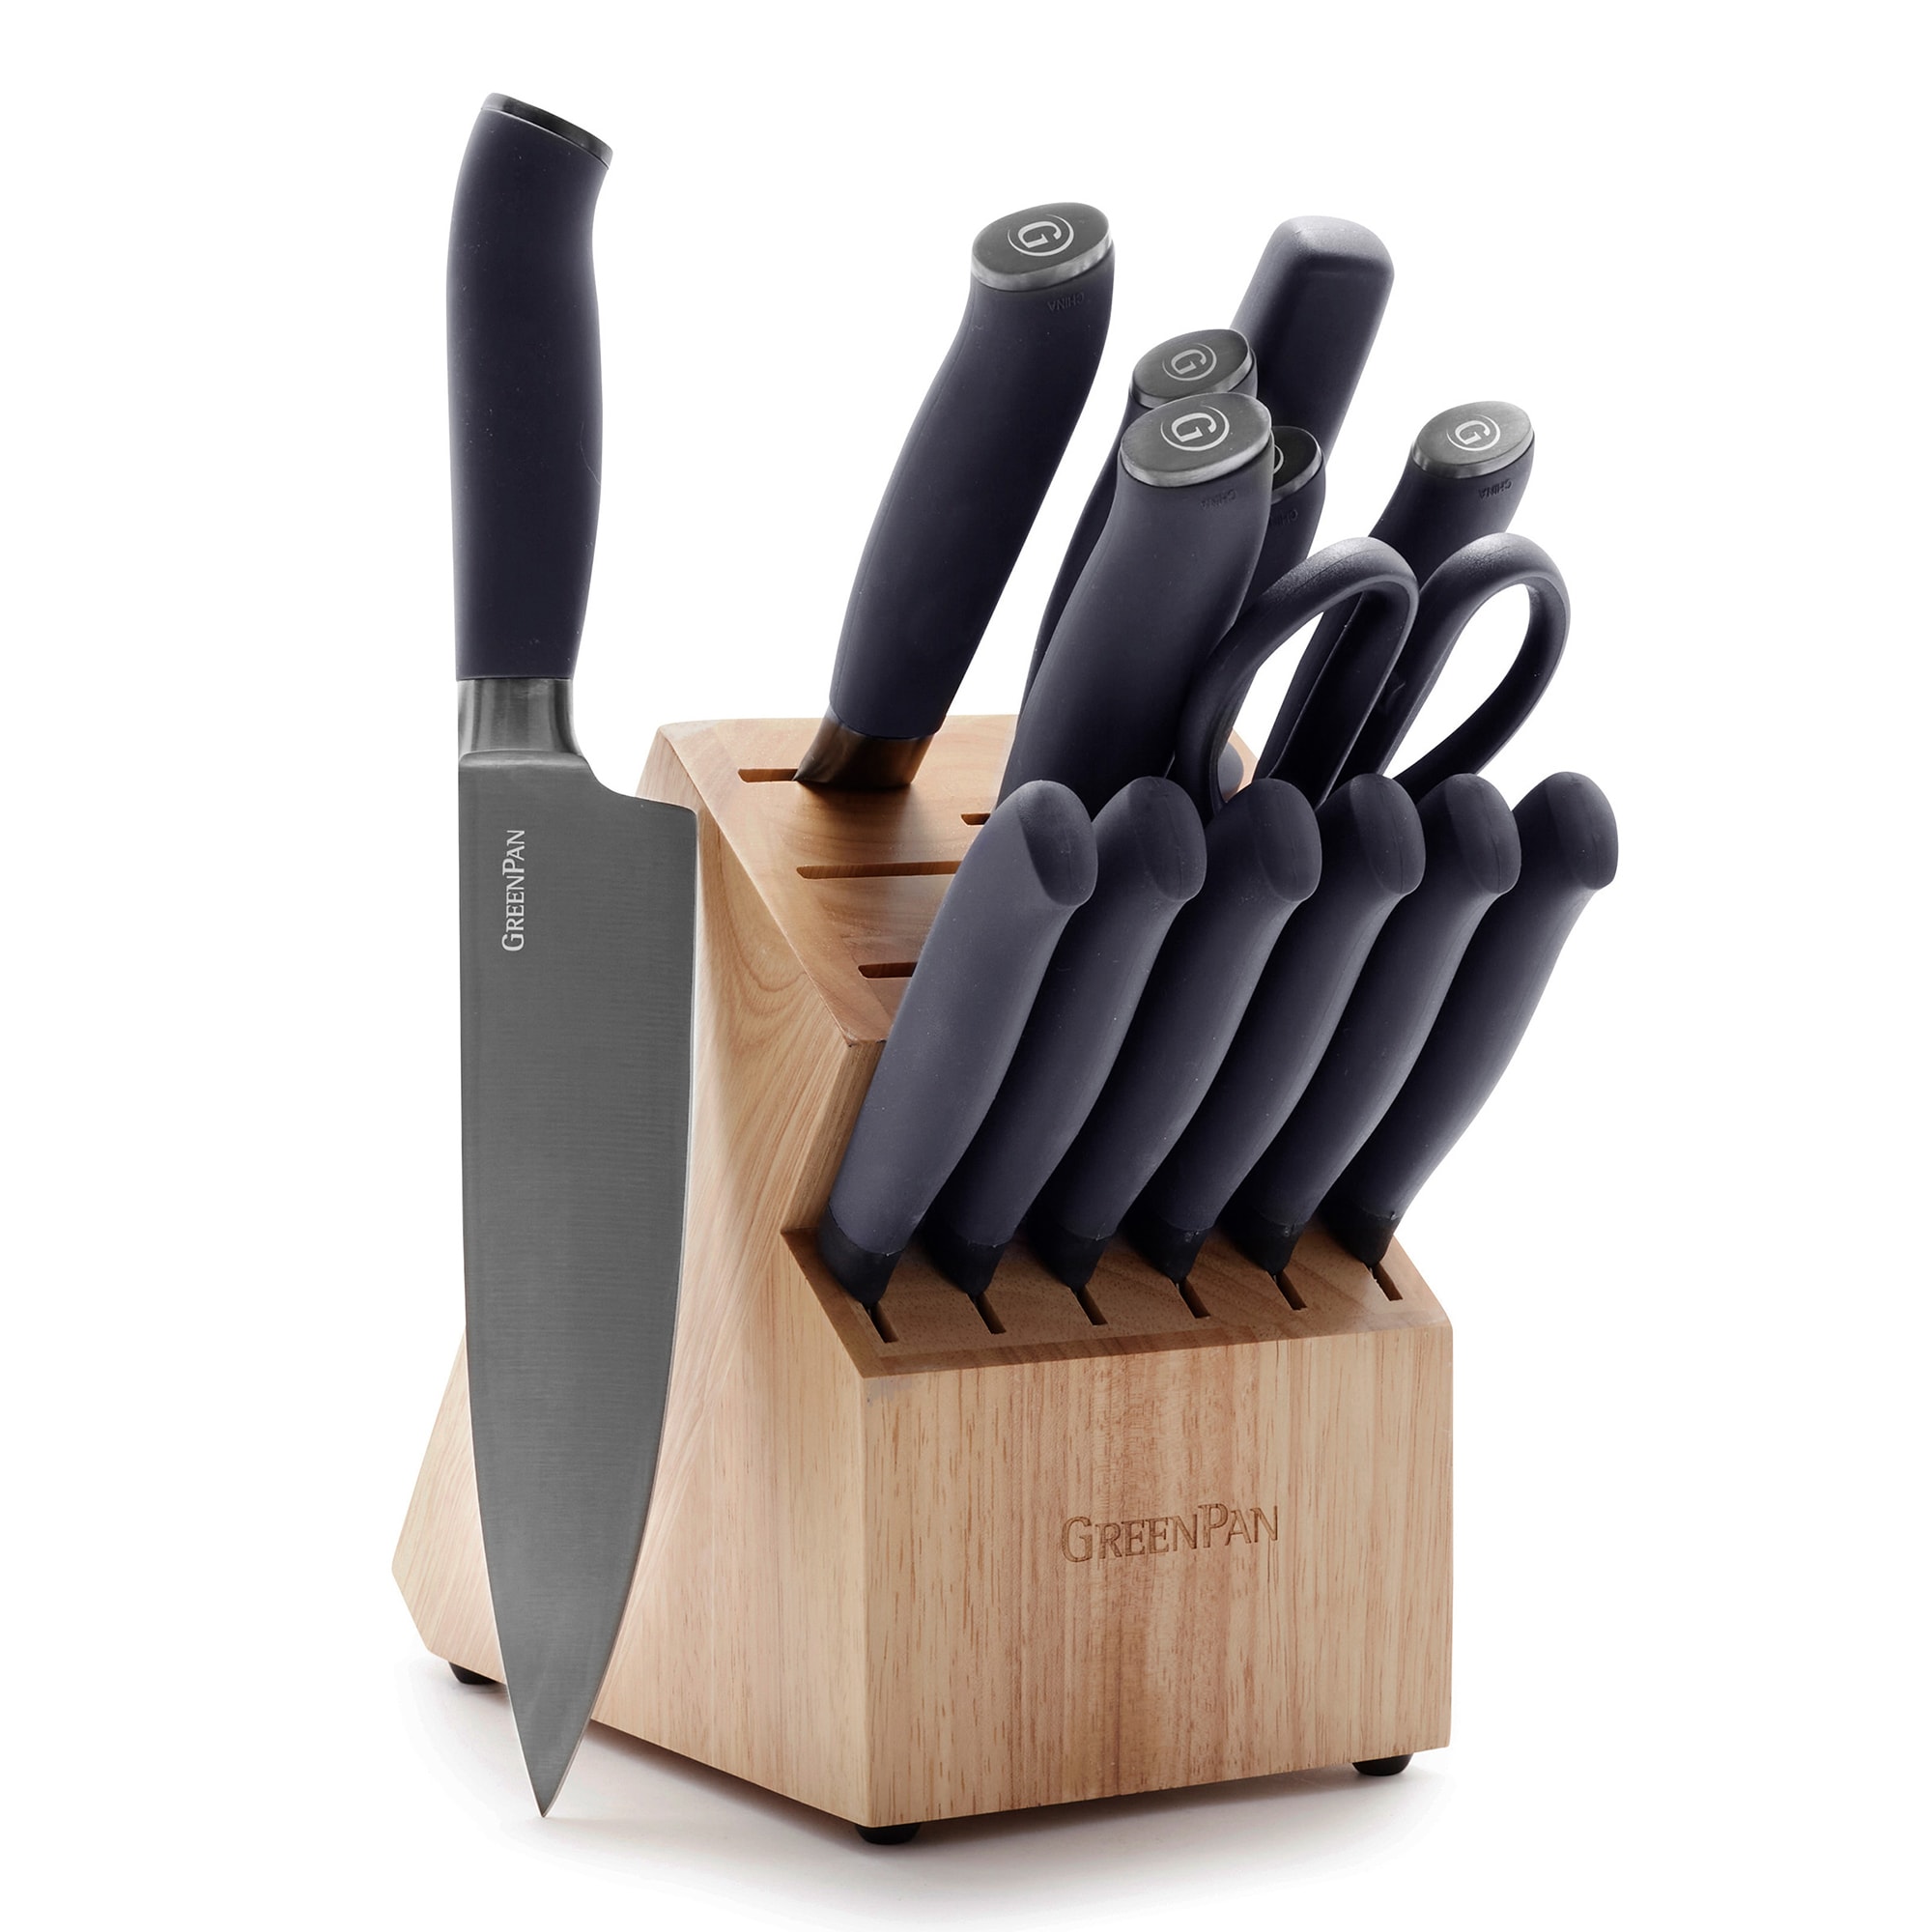 Greenpan 16-Piece Gray/Silver Knife Set with Rubber Handle